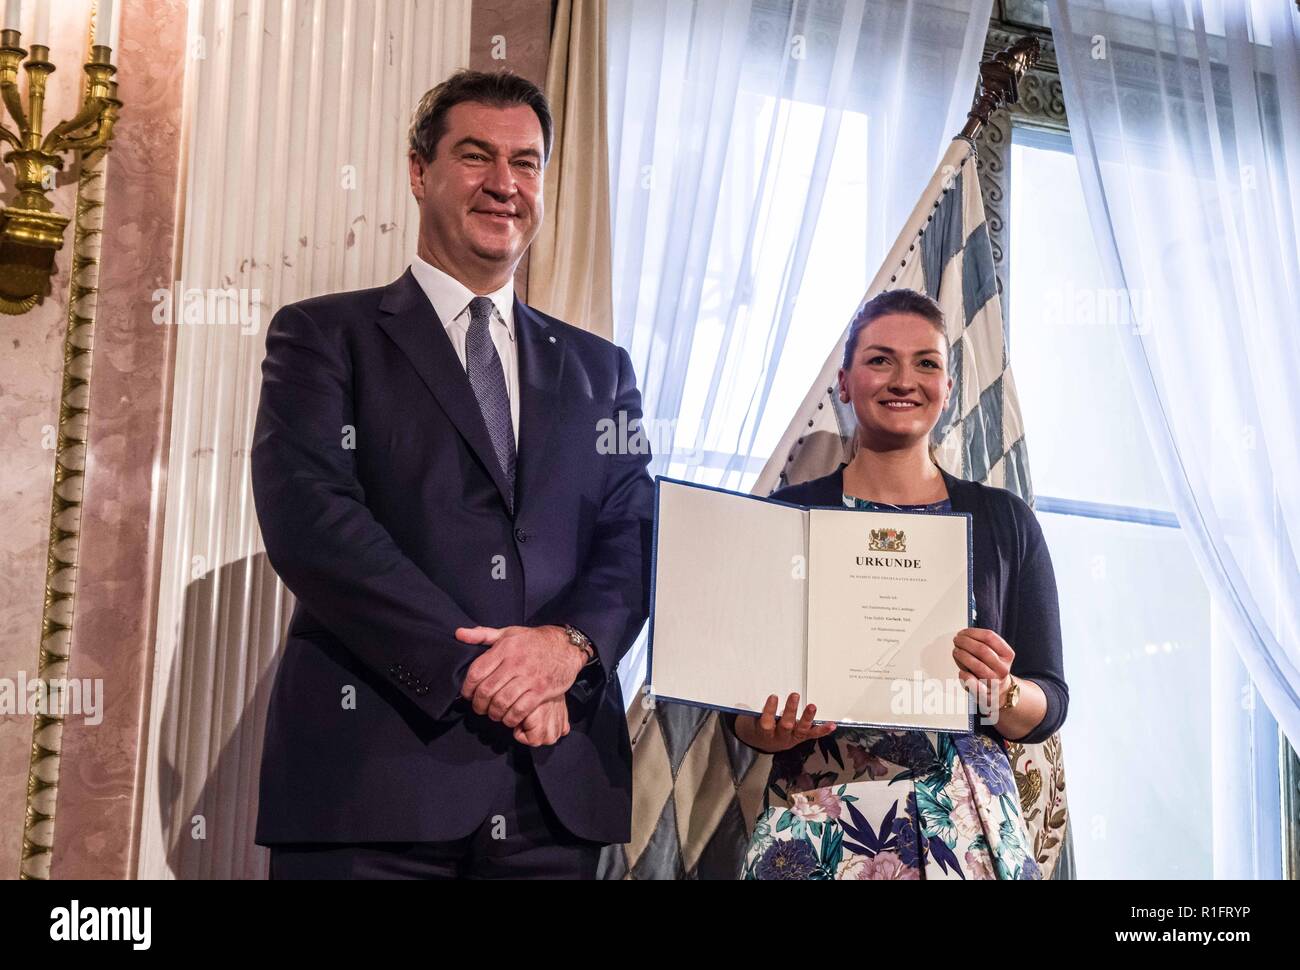 November 12, 2018 - Munich, Bavaria, Germany - Judith Gerlach, MdL Staatsminister fÃ¼r Digitales, Medien und Europa. Minister President of Bavaria MARKUS SOEDER presented the new members of his cabinet at Prinz Carl Palais.  Dr. Soeder was confirmed as Minister President on Nov. 6th and is the successor to Horst Seehofer. (Credit Image: © Sachelle Babbar/ZUMA Wire) Stock Photo